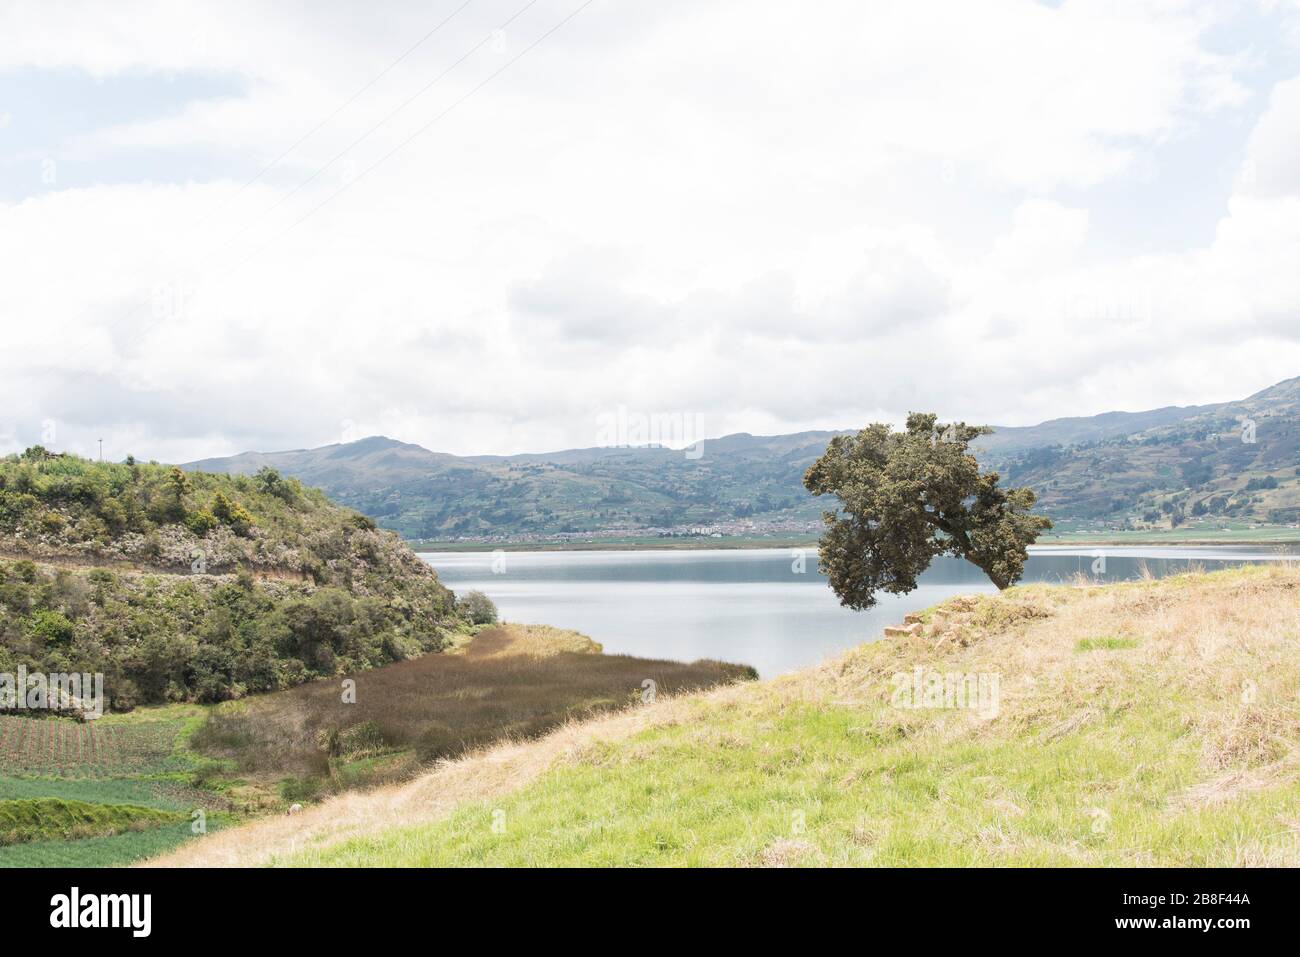 Aquitania, Boyaca / Colombia; April 8, 2018: Rural Andean landscape, Tota, the largest Colombian lake, and the fields that surround it Stock Photo